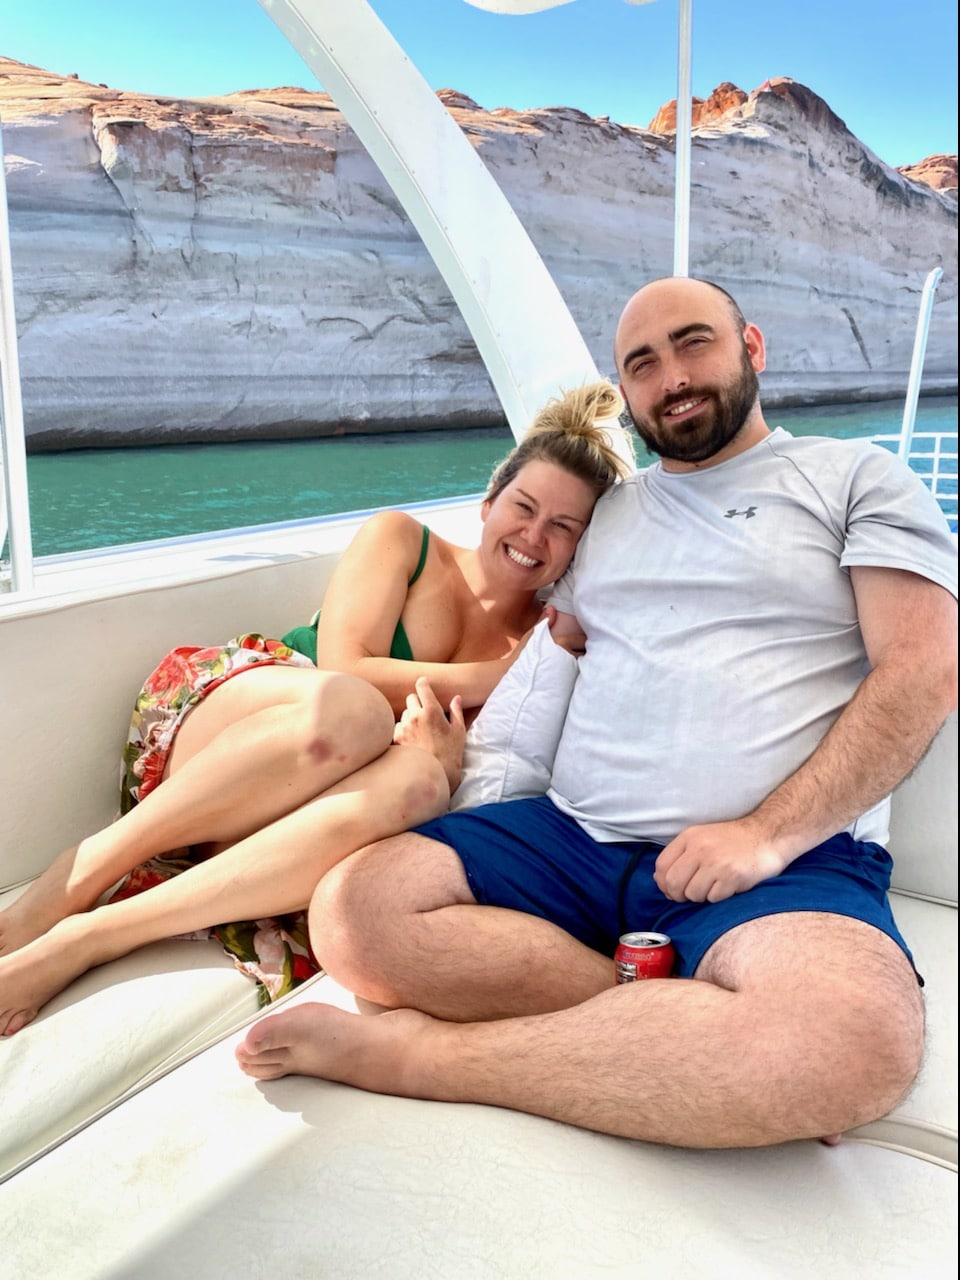 couple lounging on a boat in a lake